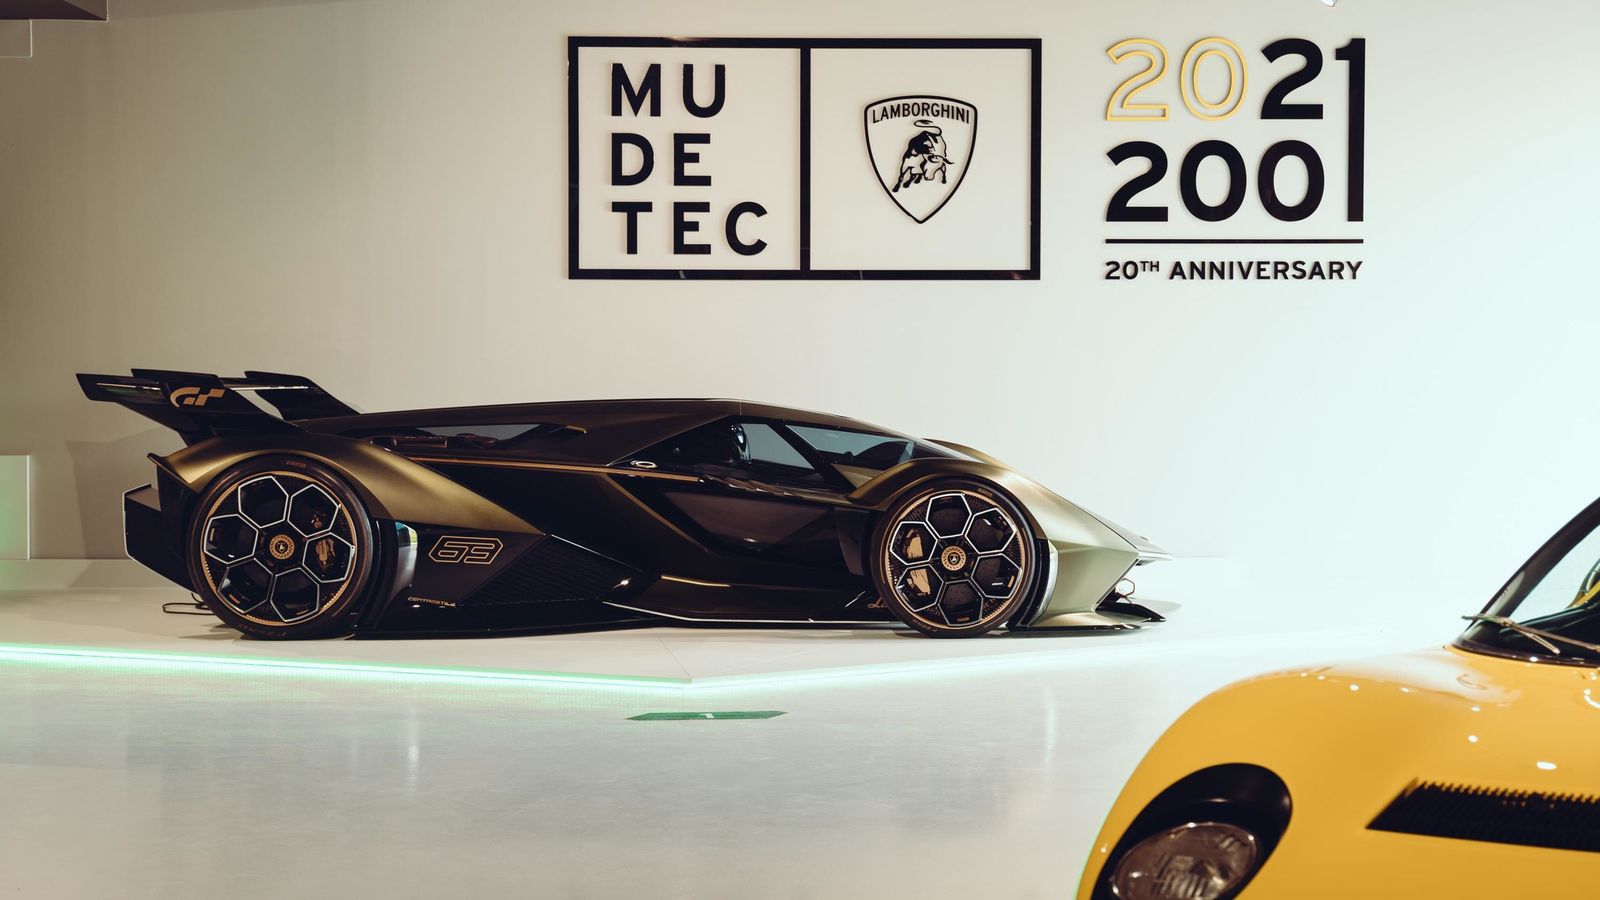 Lamborghini reopens its MUDETEC museum with exhibition on innovation,  tradition | HT Auto